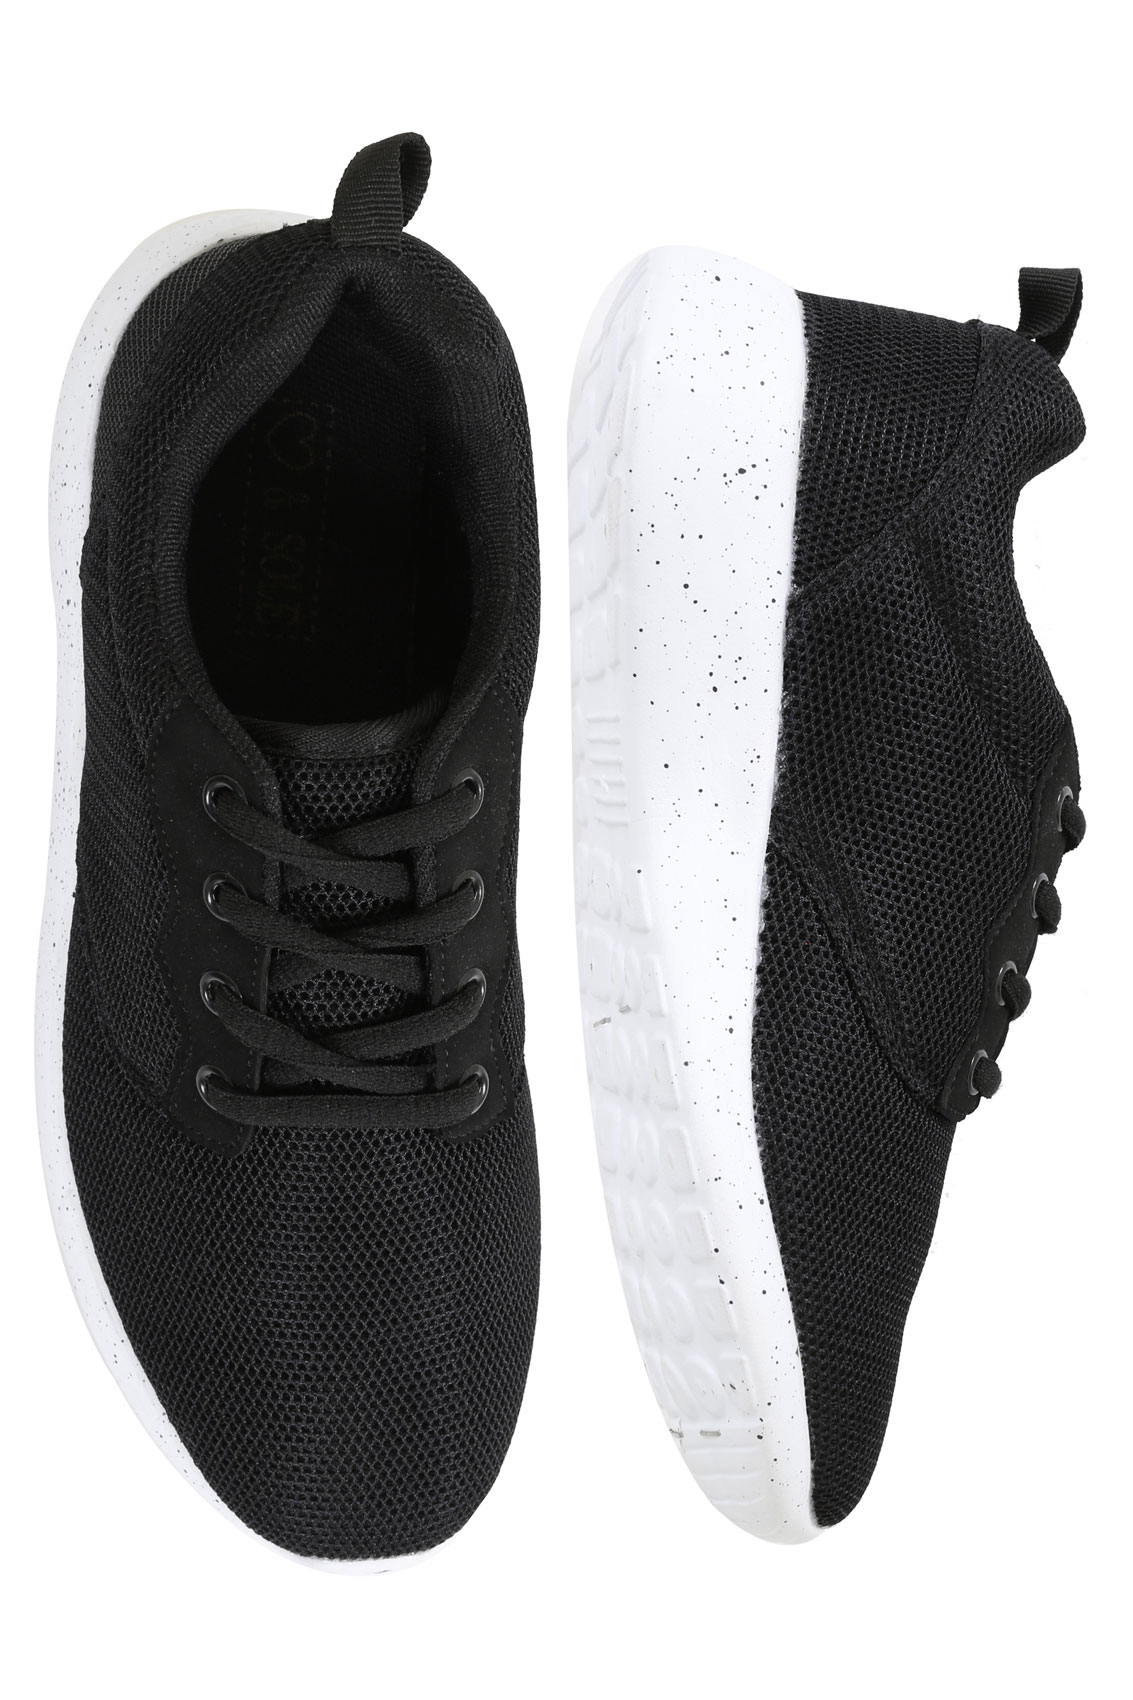 Black Mesh Detail Trainers With Flecked Cushioned Soles In E Fit, Size 4-8